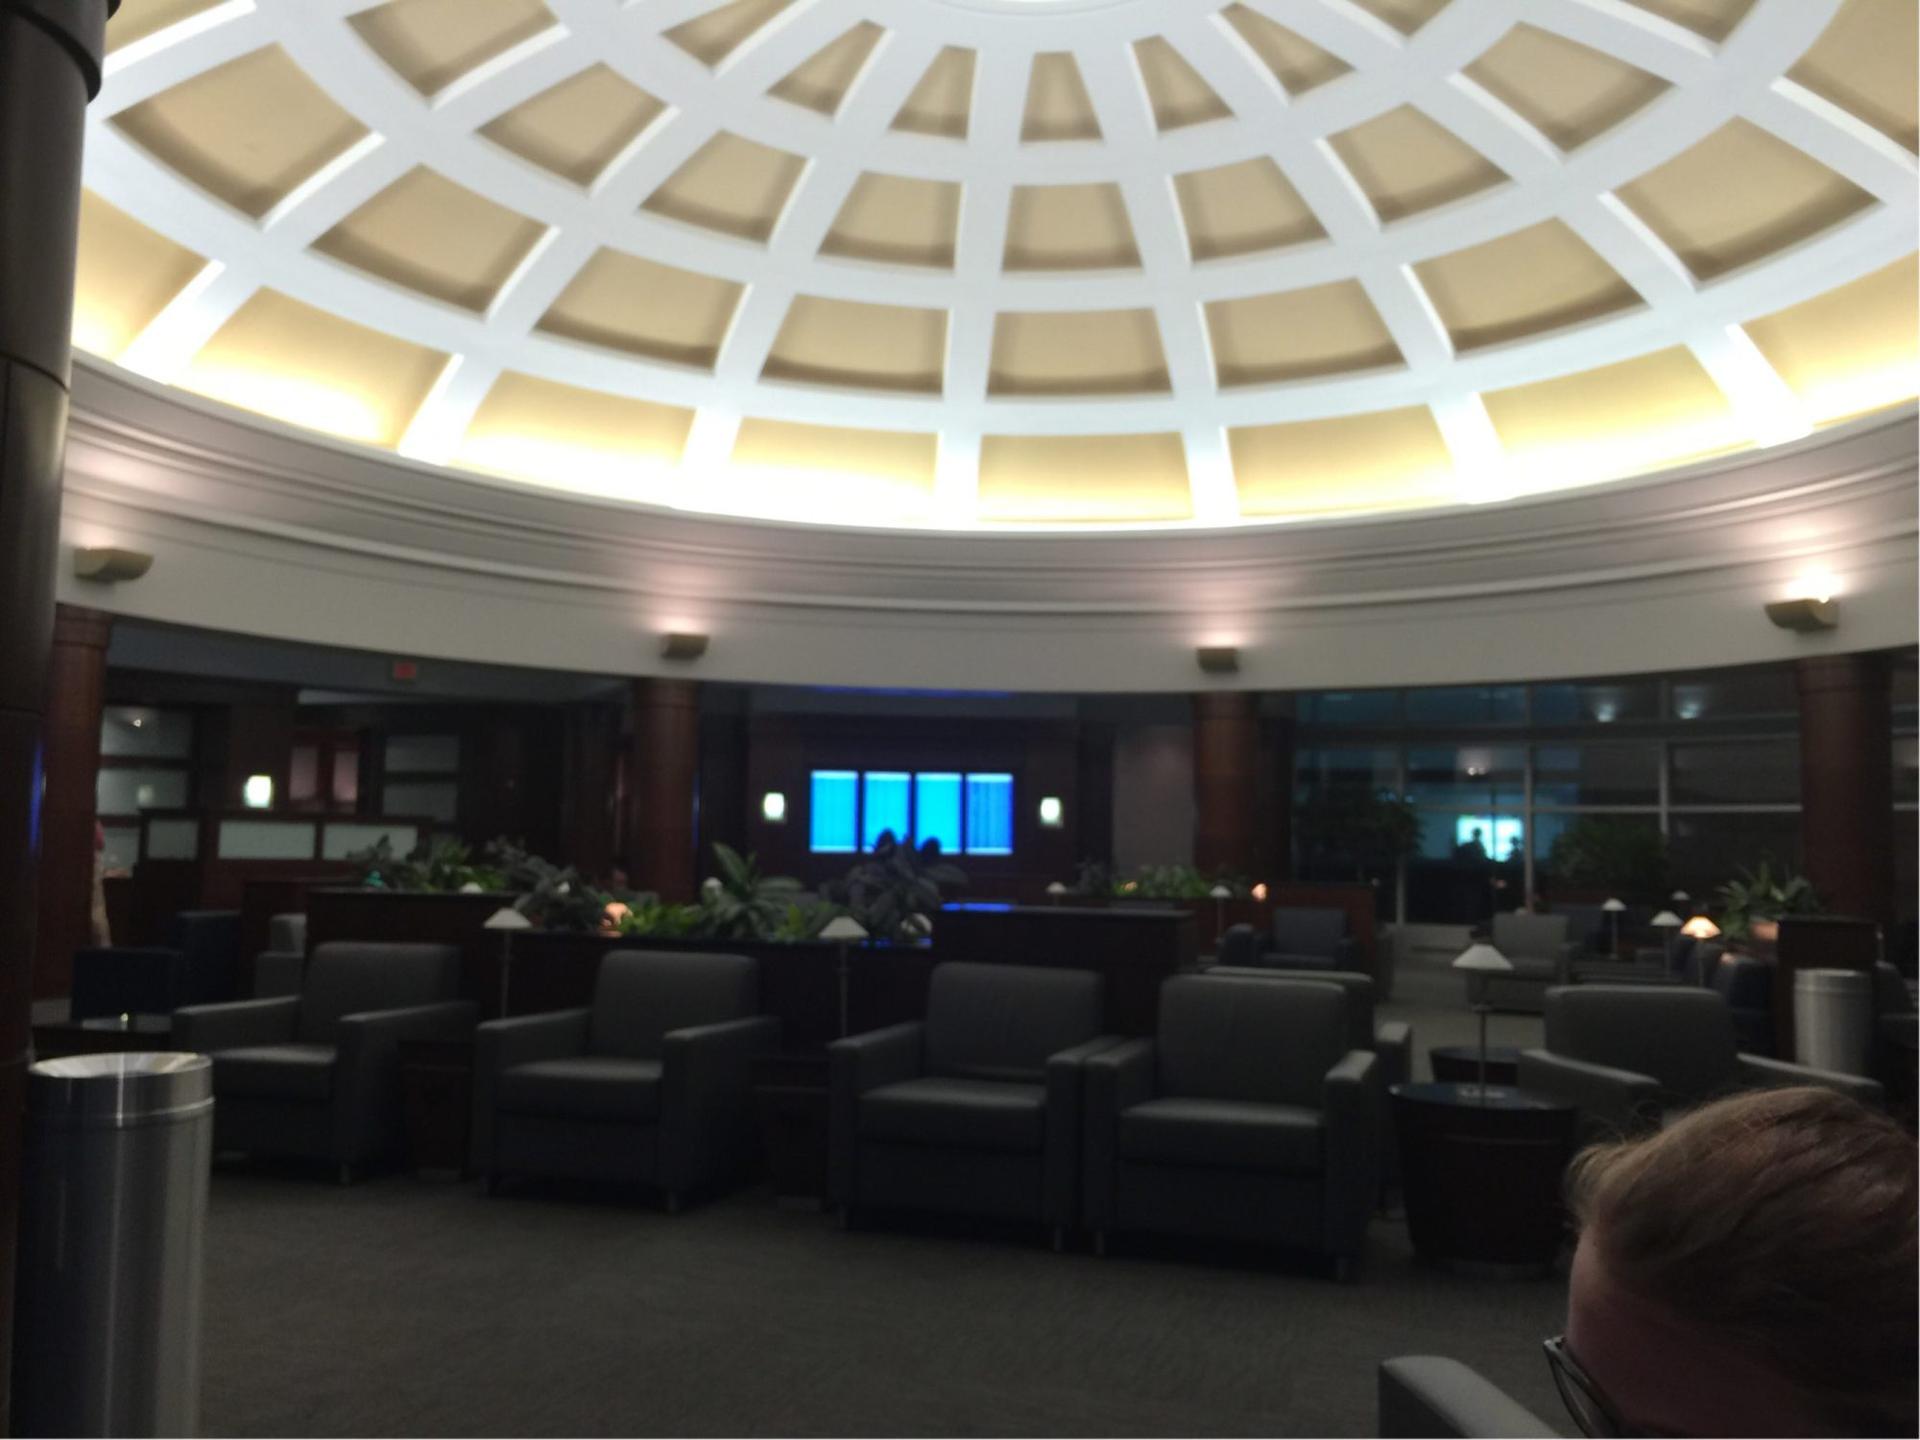 American Airlines Admirals Club image 19 of 37